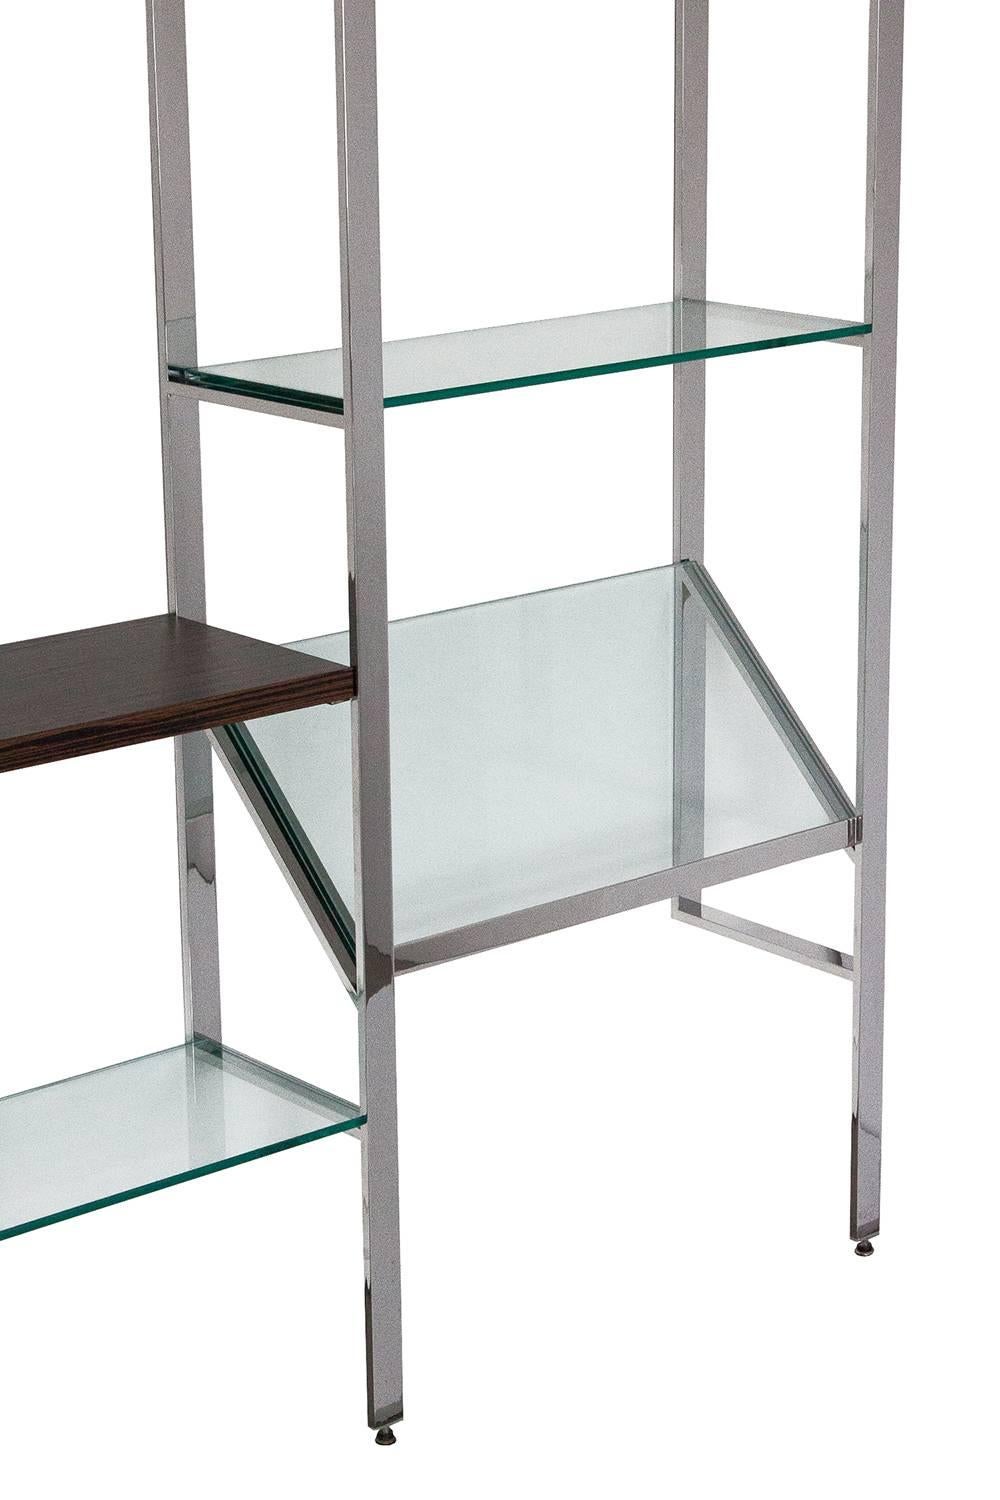 American Milo Baughman Chrome and Glass Wall-Mounted Shelving System